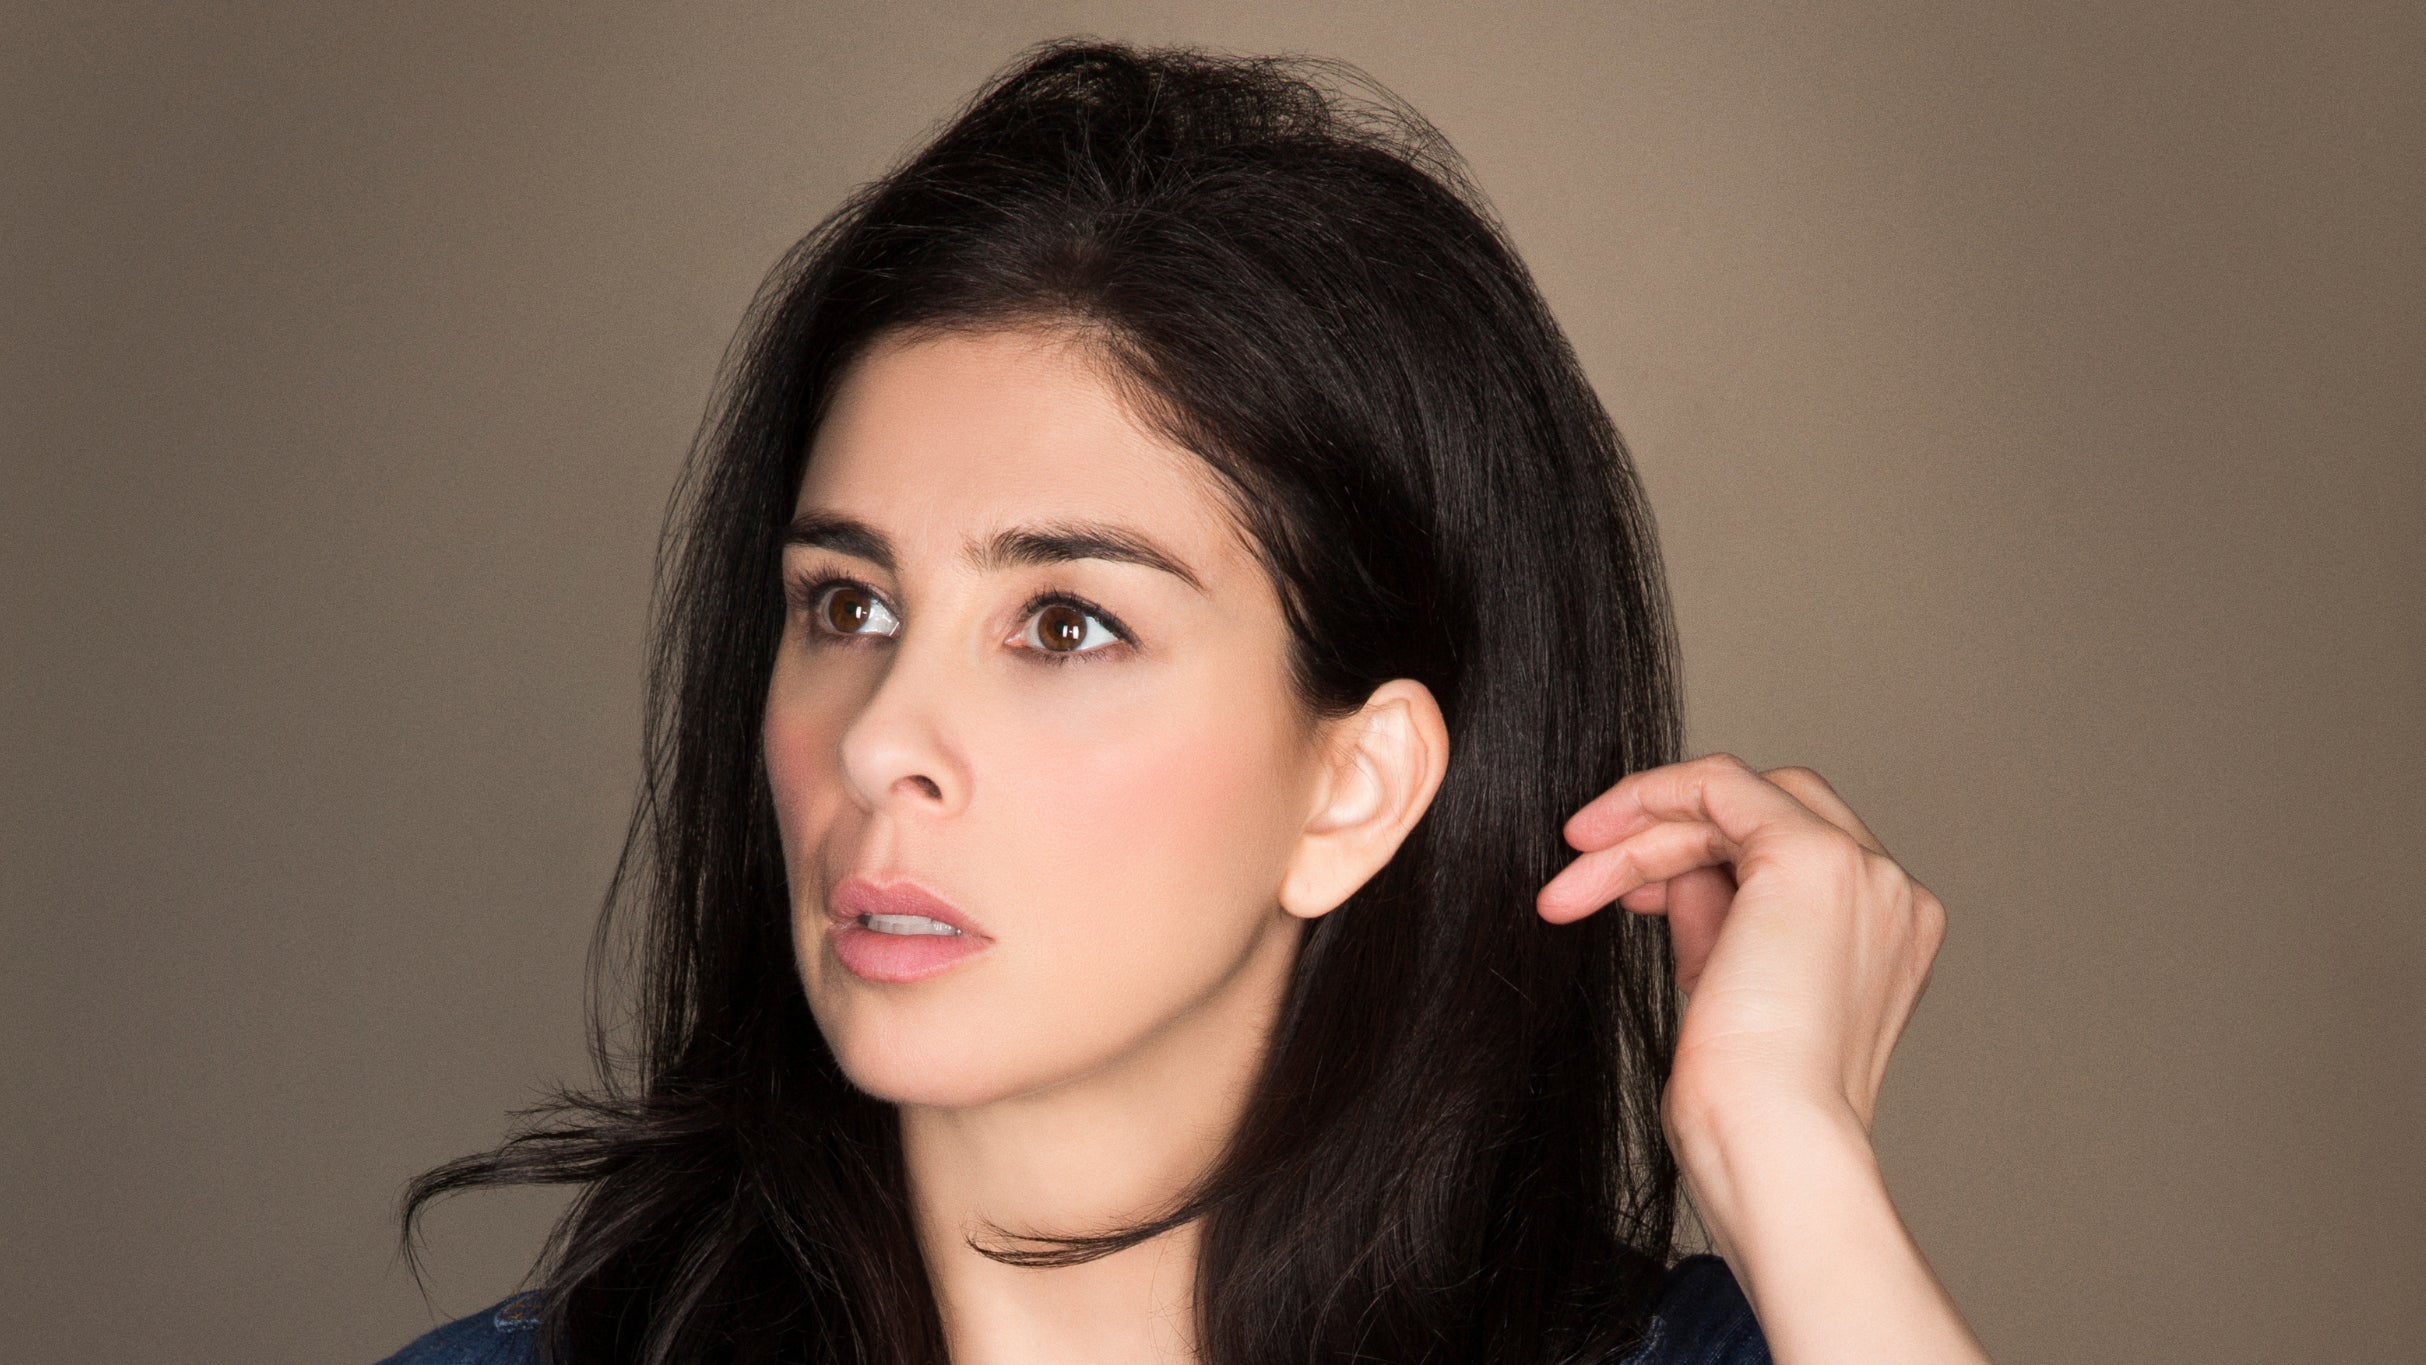 Netflix Is A Joke Presents: Sarah Silverman in Hollywood promo photo for Ticketmaster presale offer code